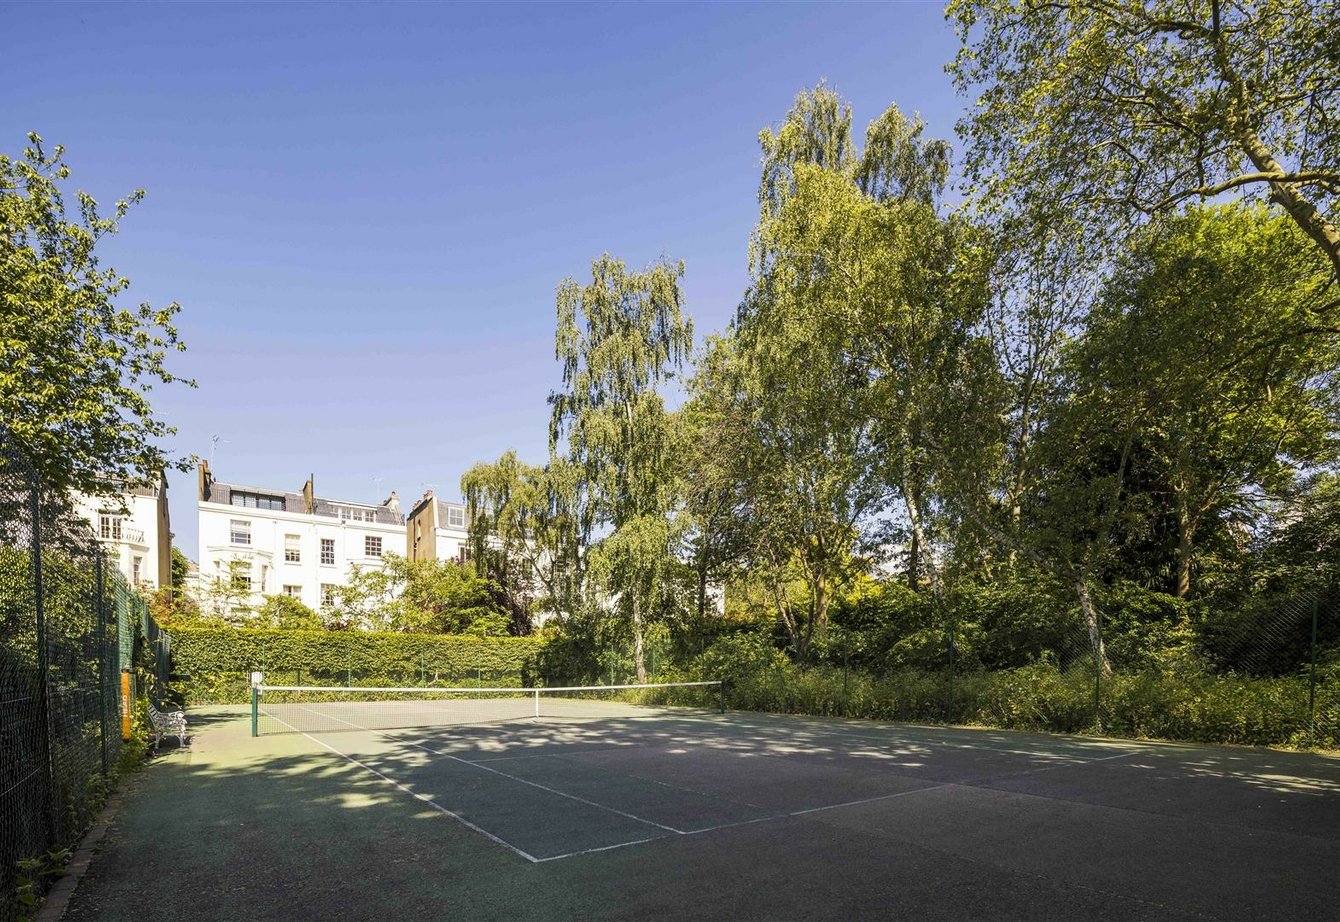 for-sale-randolph-road-london-397-view22